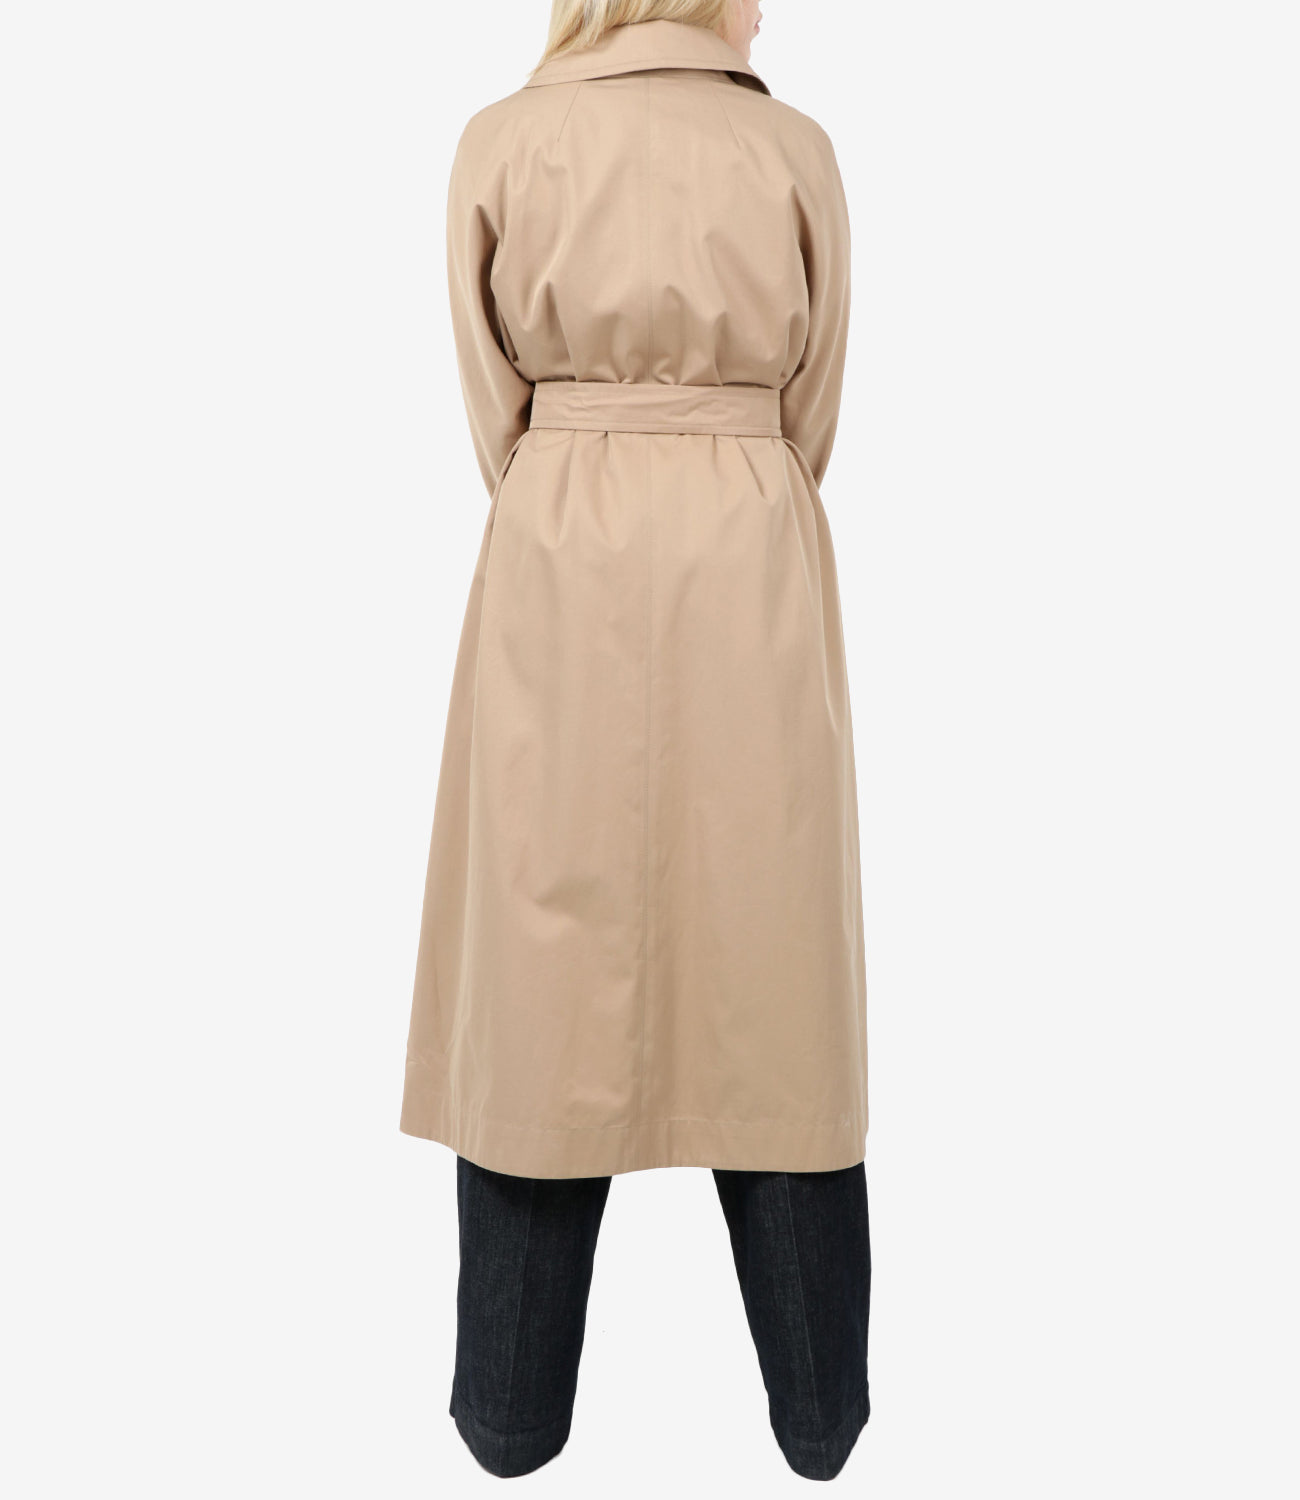 Max Mara The Cube | Trench Etrench Camel